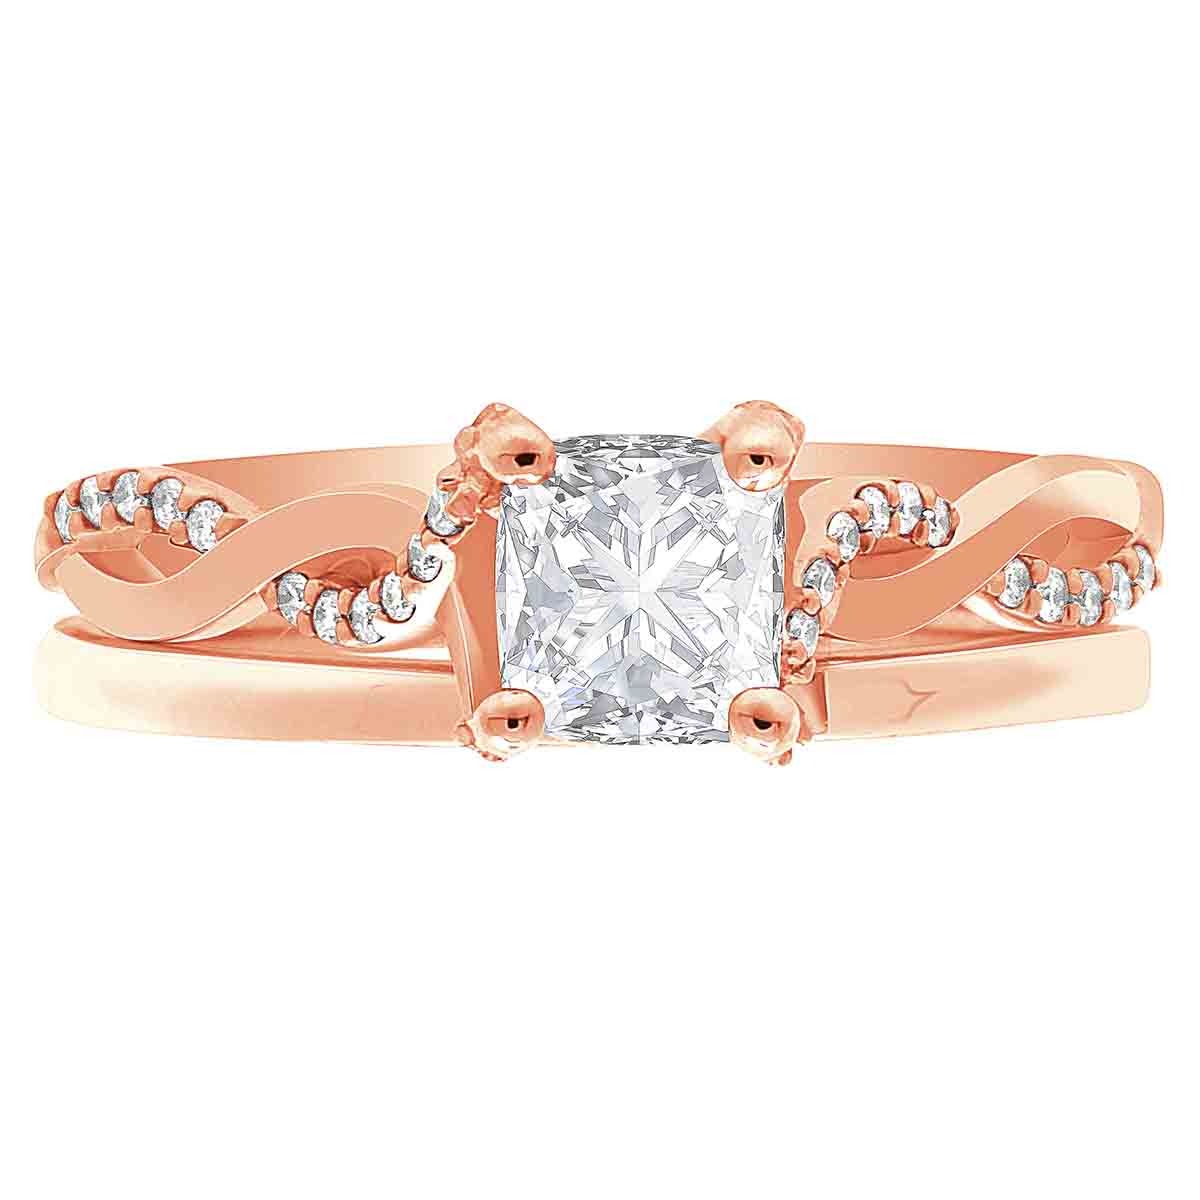 Engagement Ring With Twisted band made in rose gold with a plain wedding ring